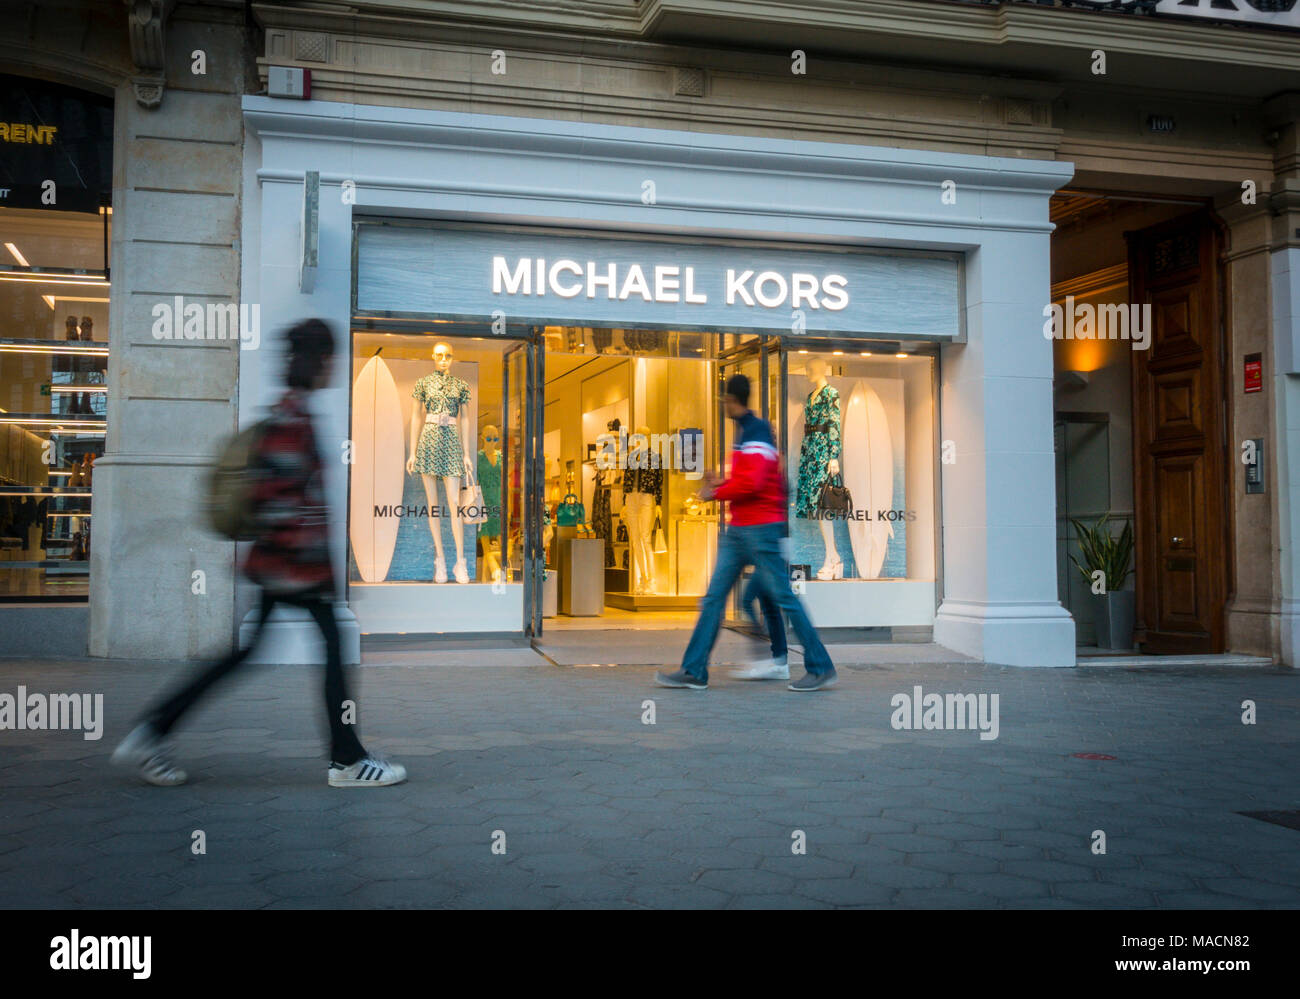 Barcelona, Spain. March 2018: People walking in front of Michael Kors shop  Stock Photo - Alamy